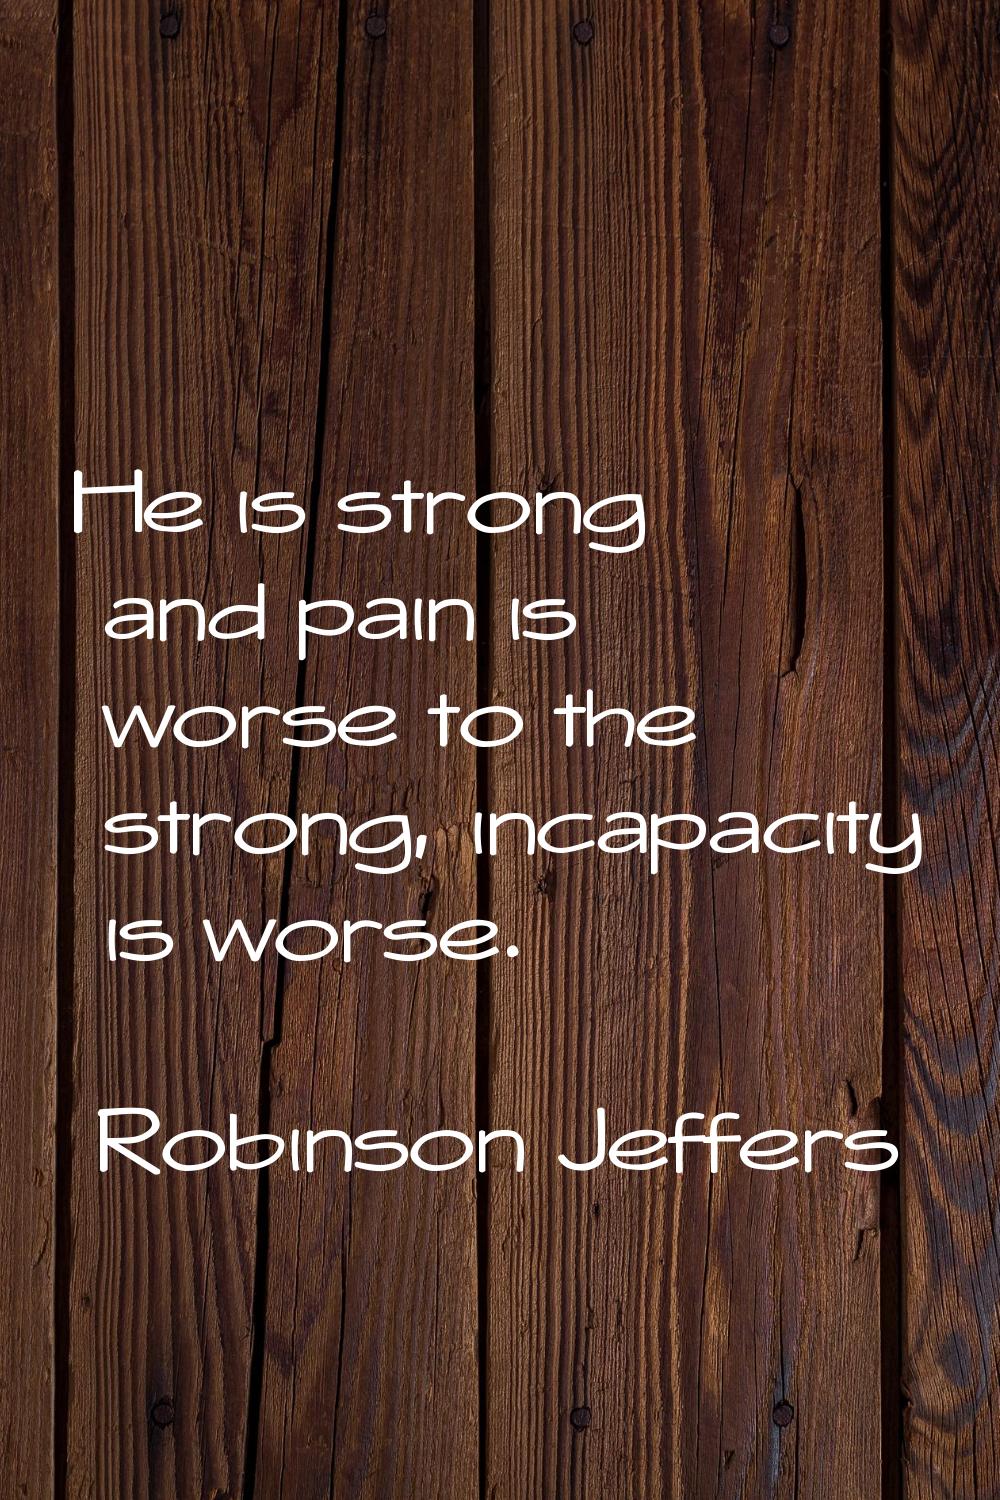 He is strong and pain is worse to the strong, incapacity is worse.